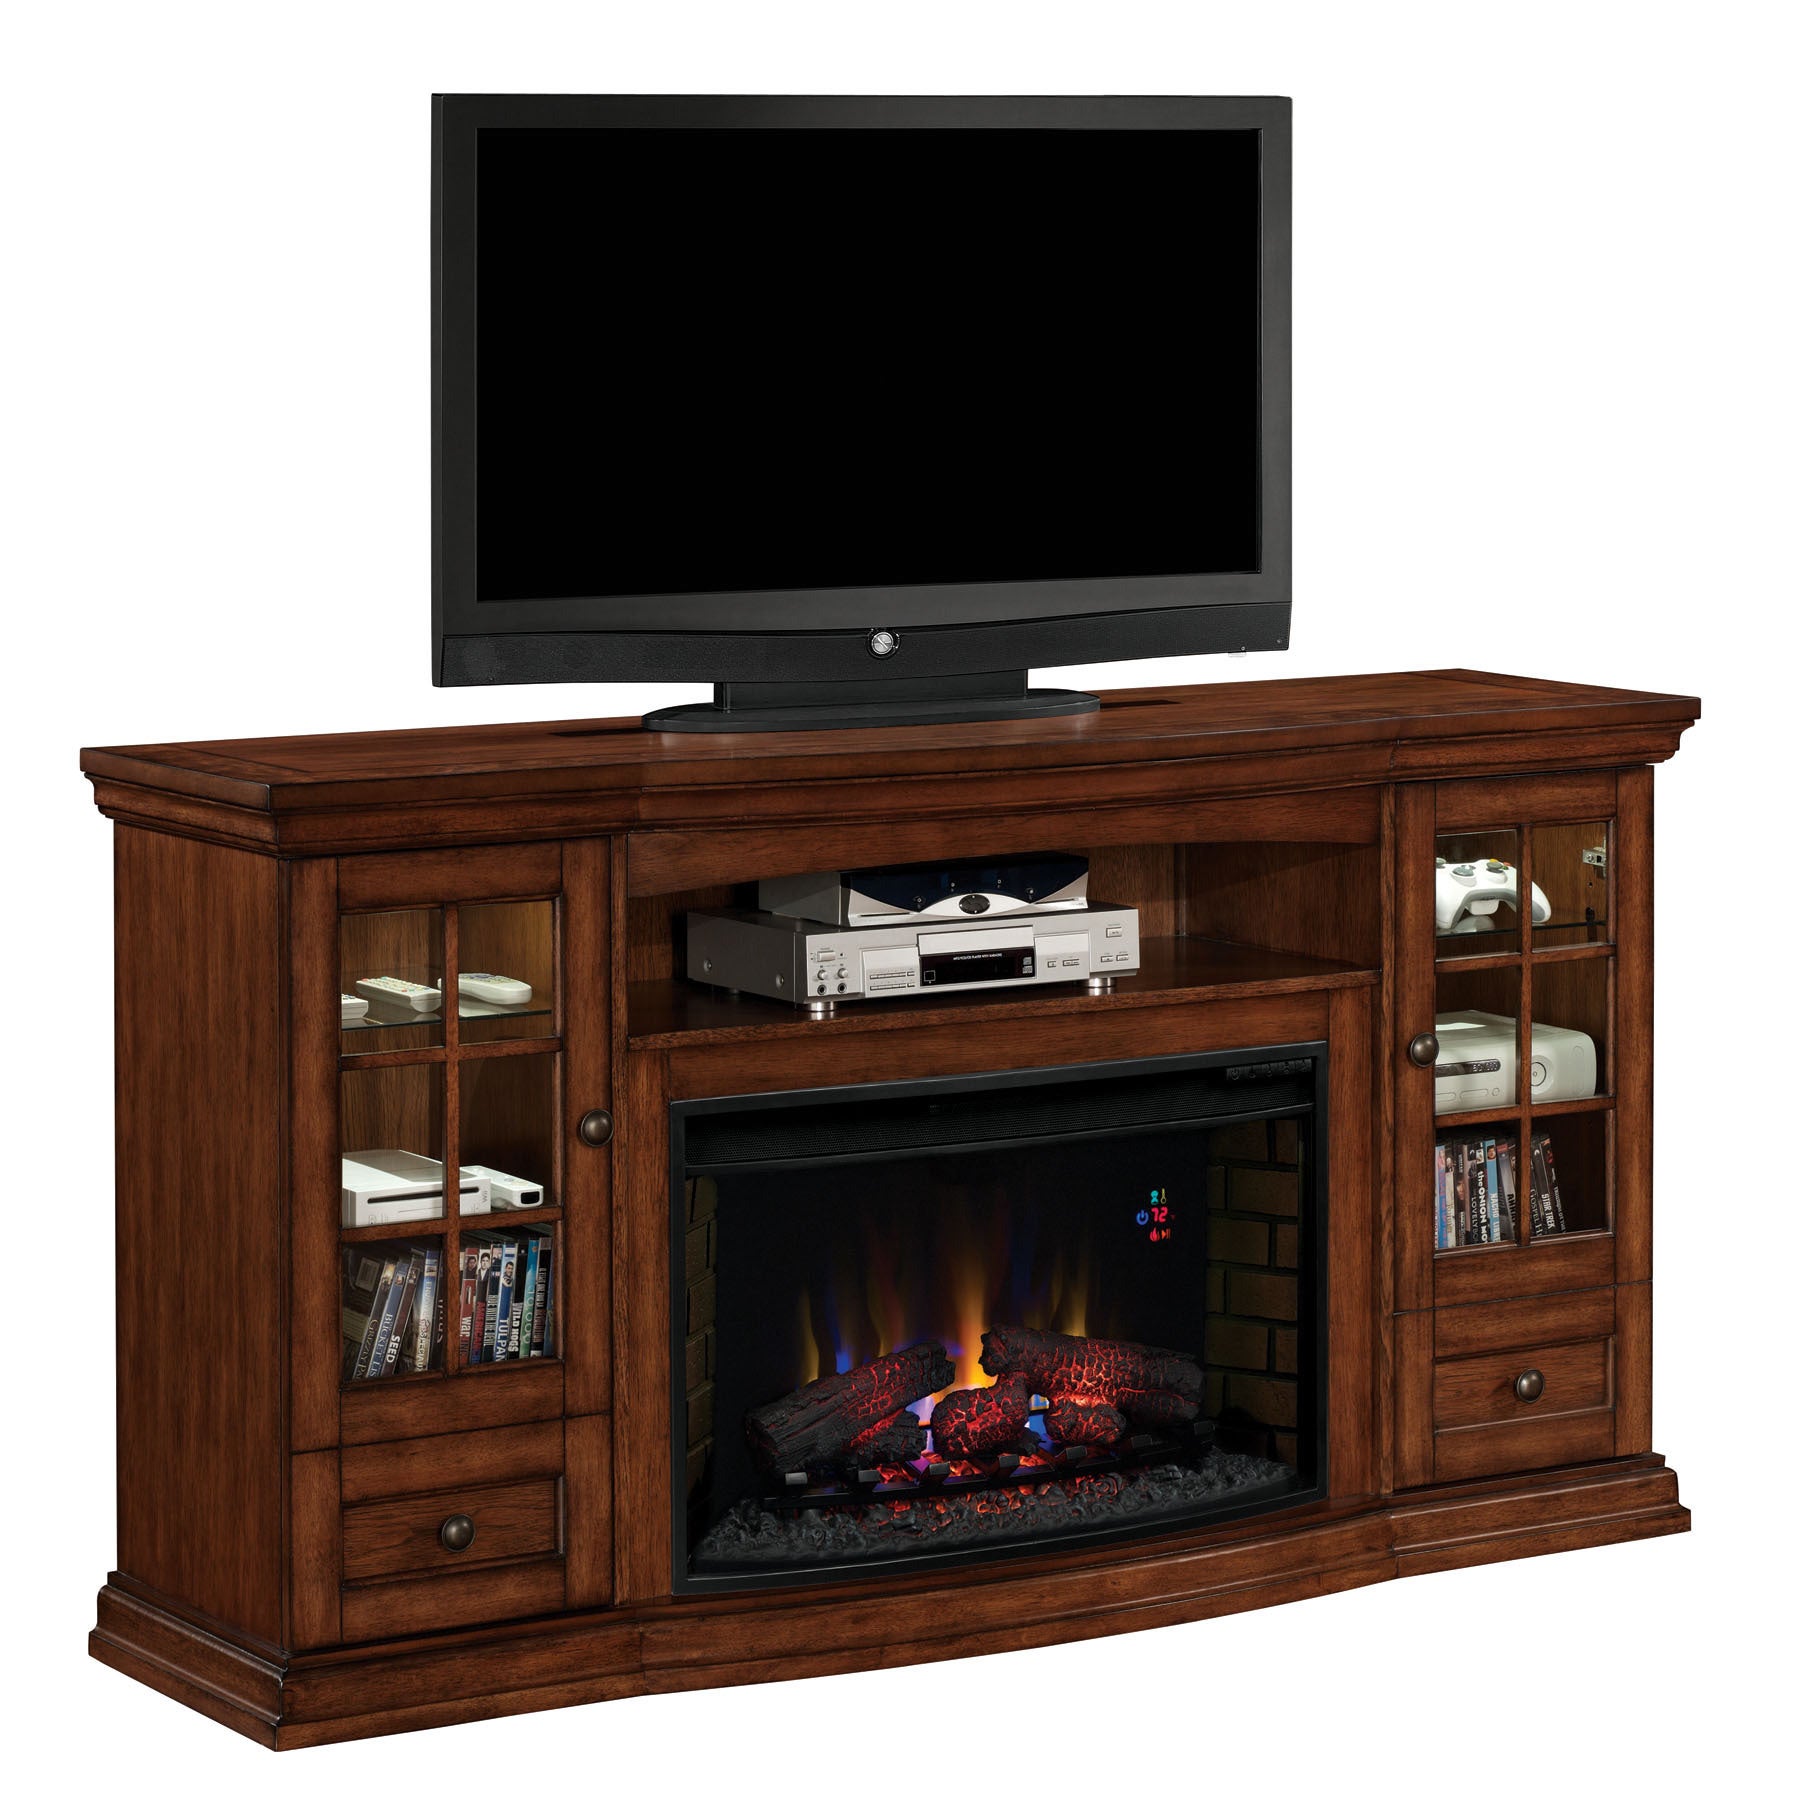 Brown Tv Stand with Fireplace Unique Seagate Tv Stand with 32 Inch Curved Infrared Quartz Fireplace Pecan